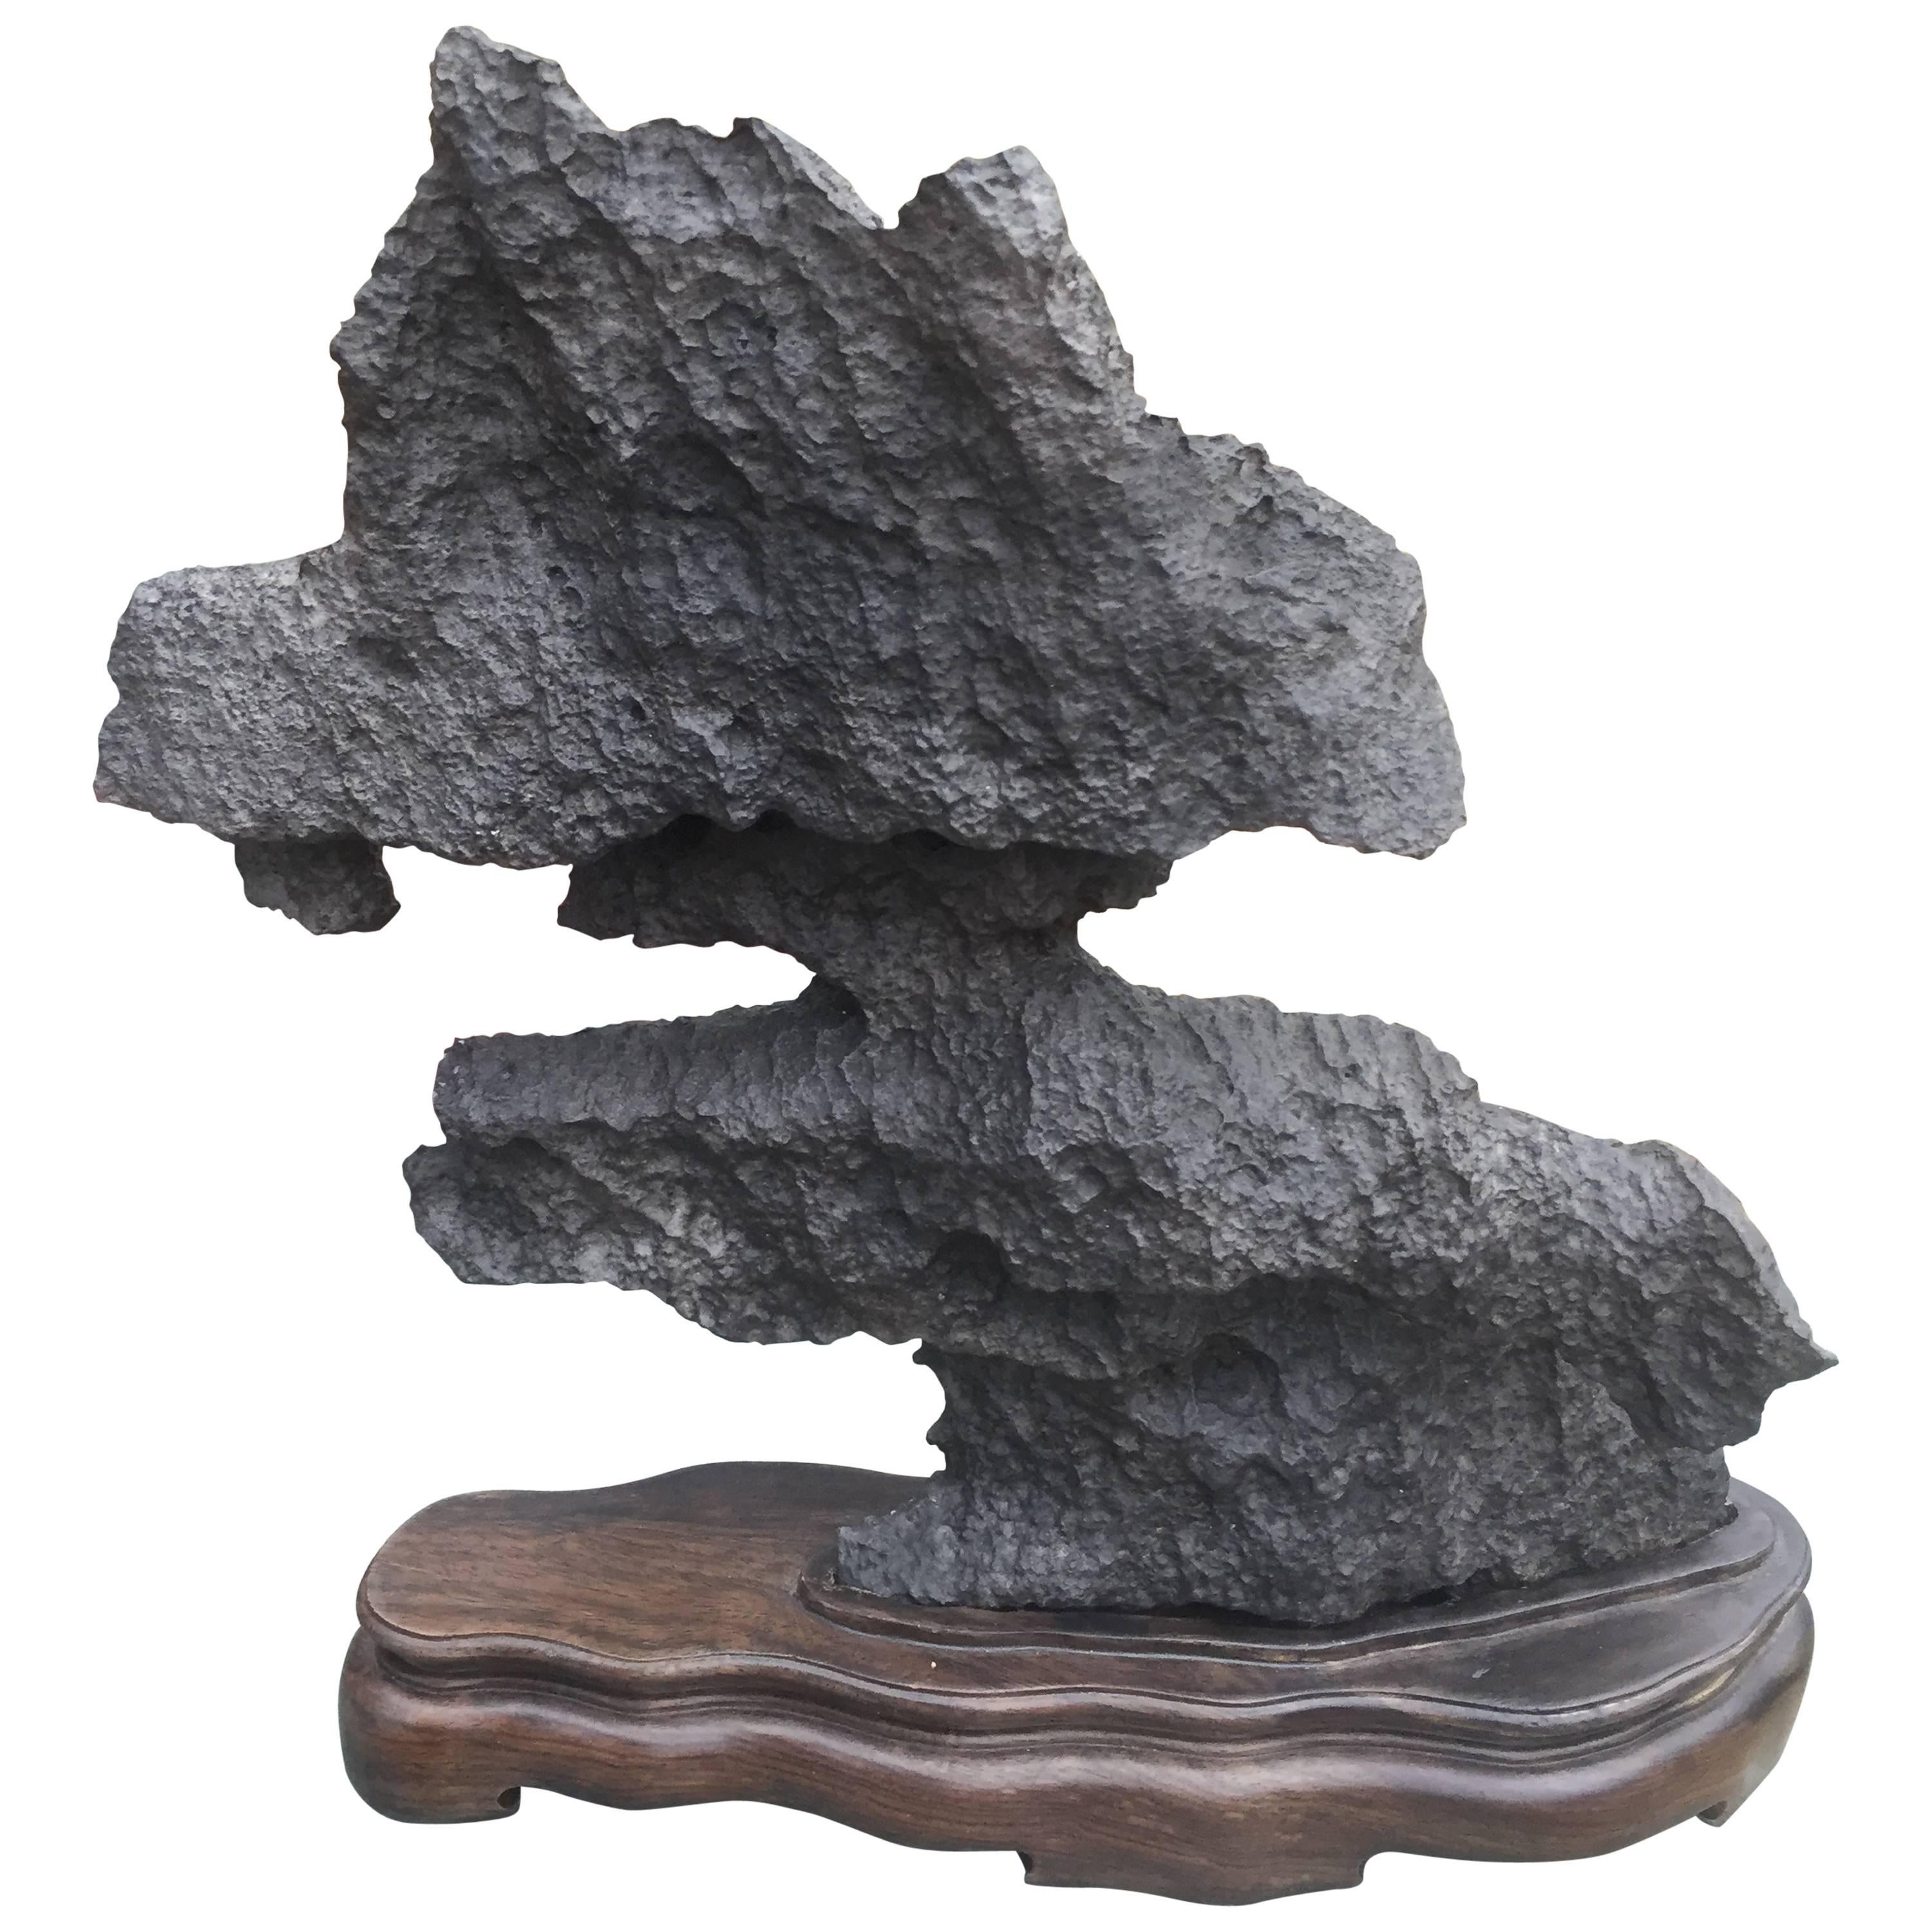 Attractive Natural Viewing Stone Scholar Rock Sculpture with Custom Display Base